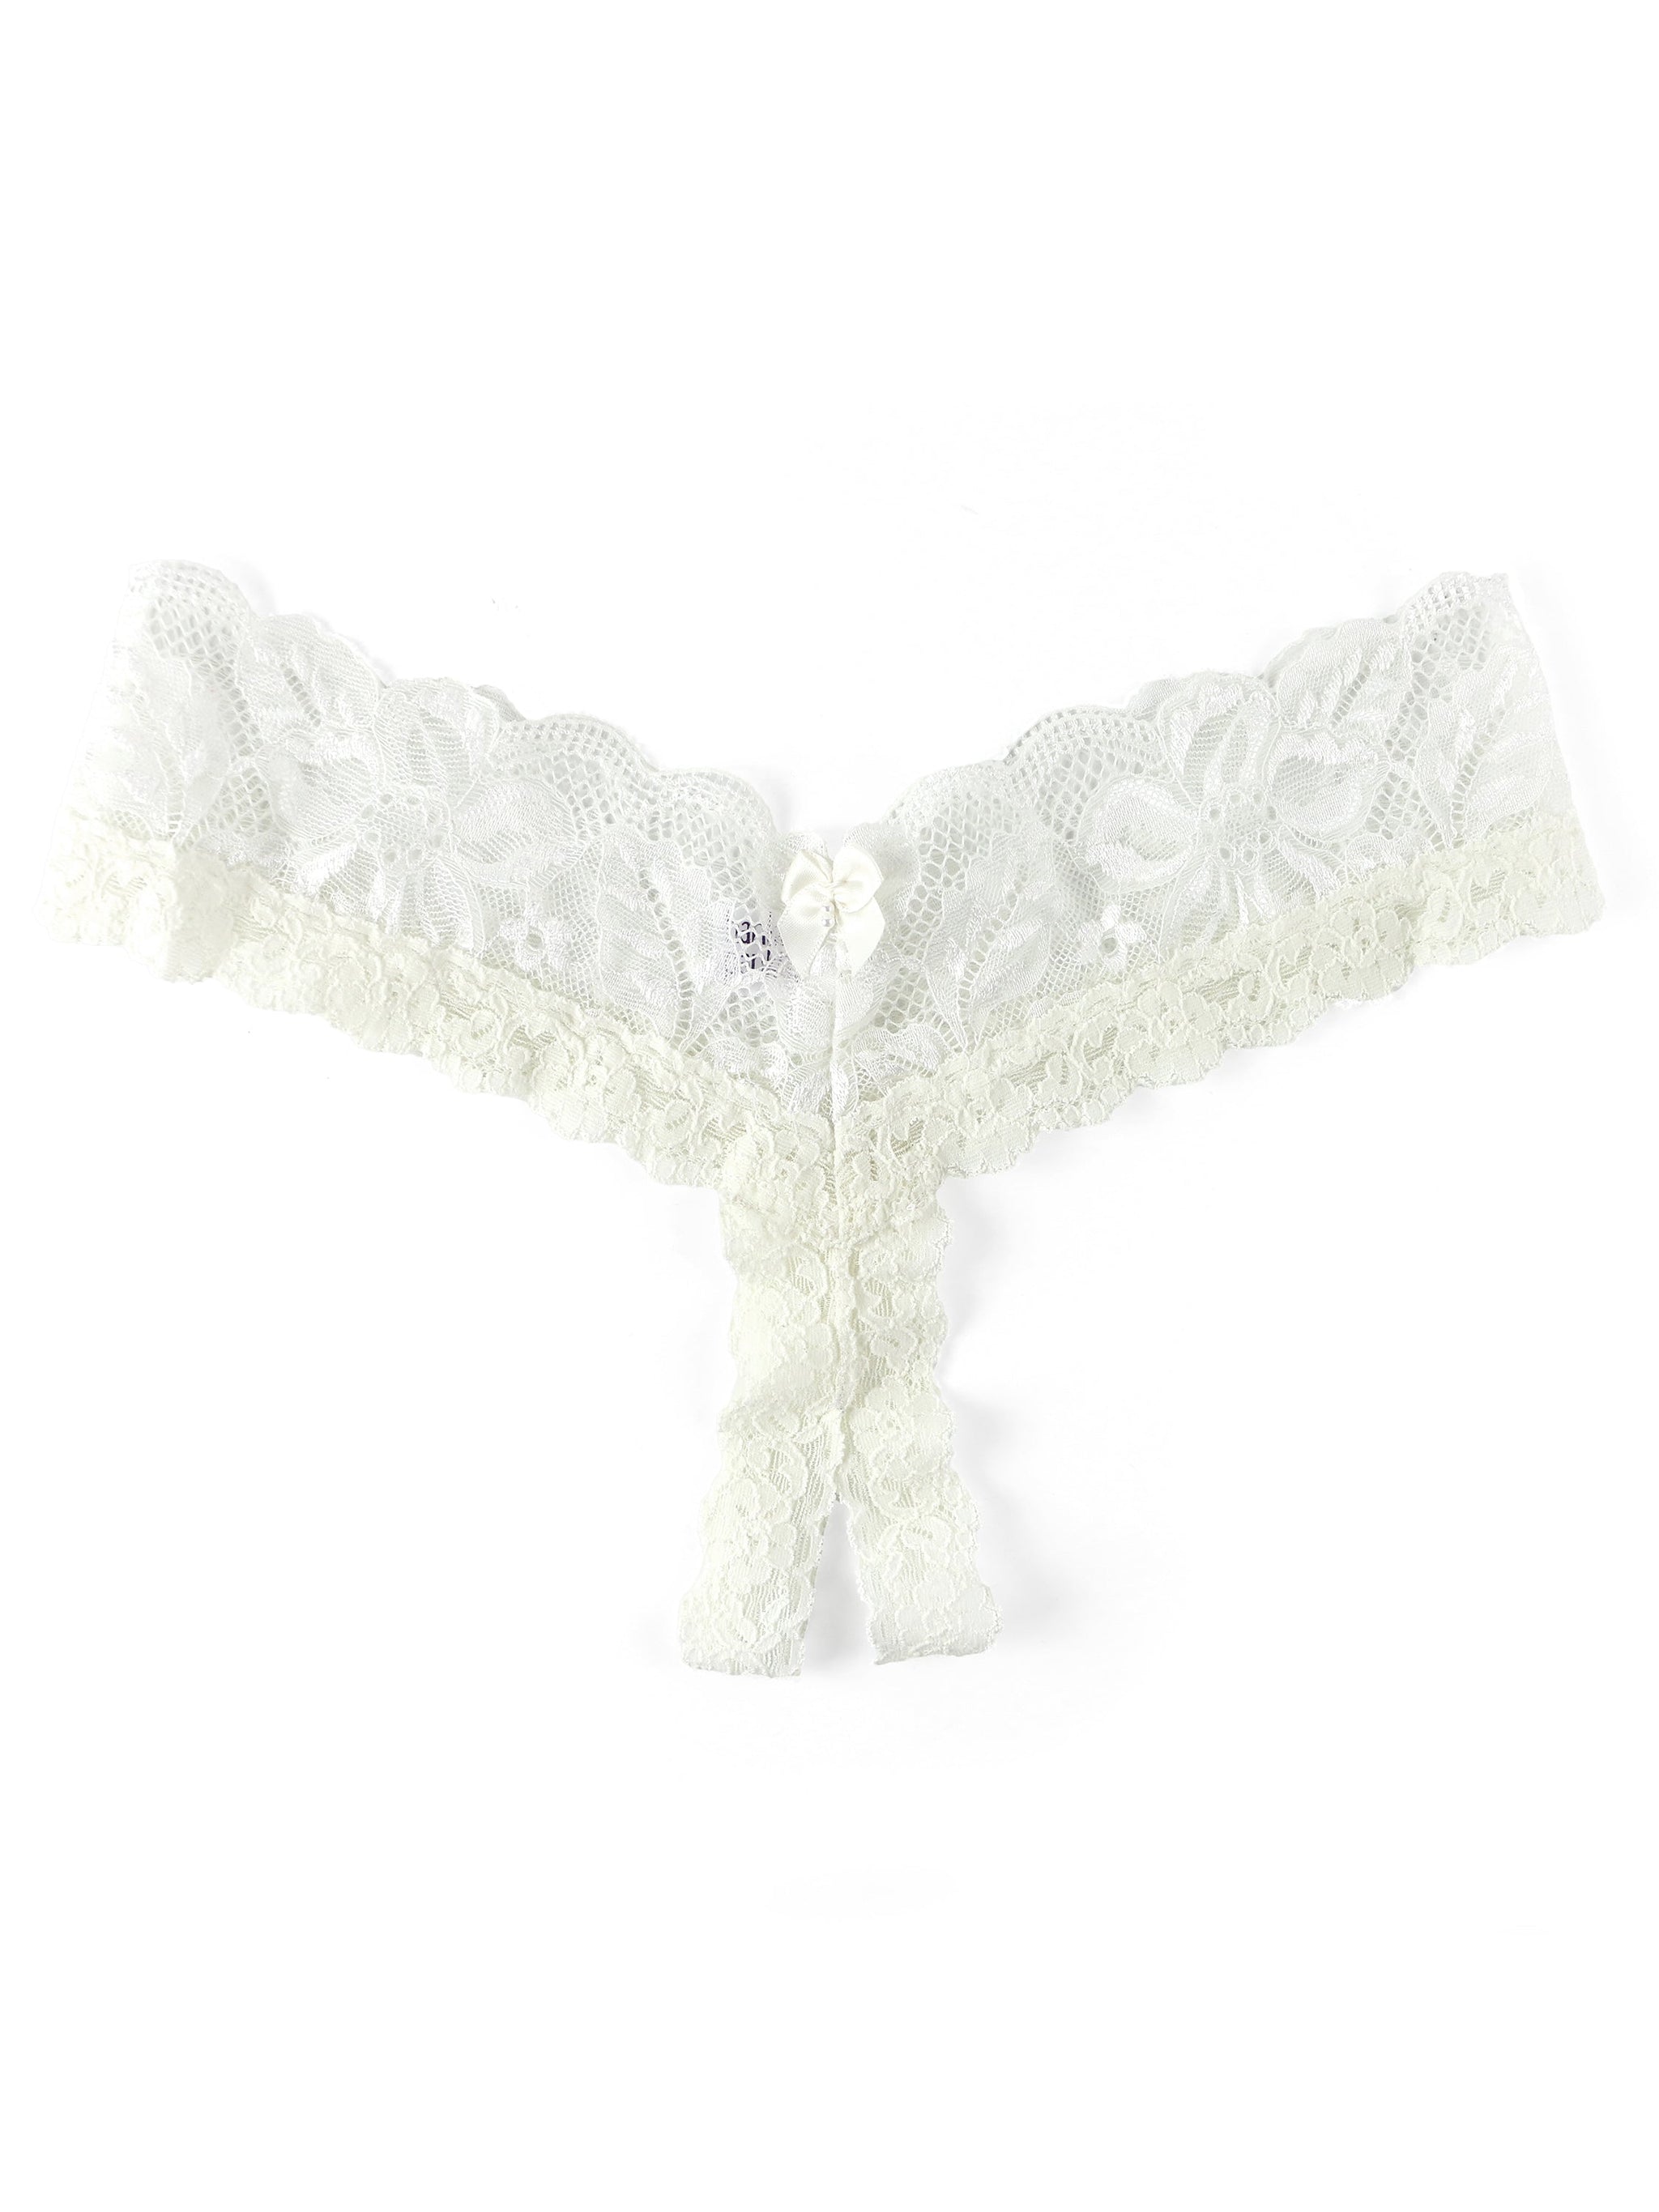 Lace Clear Women's Panties Flattering Crotchless Underwear